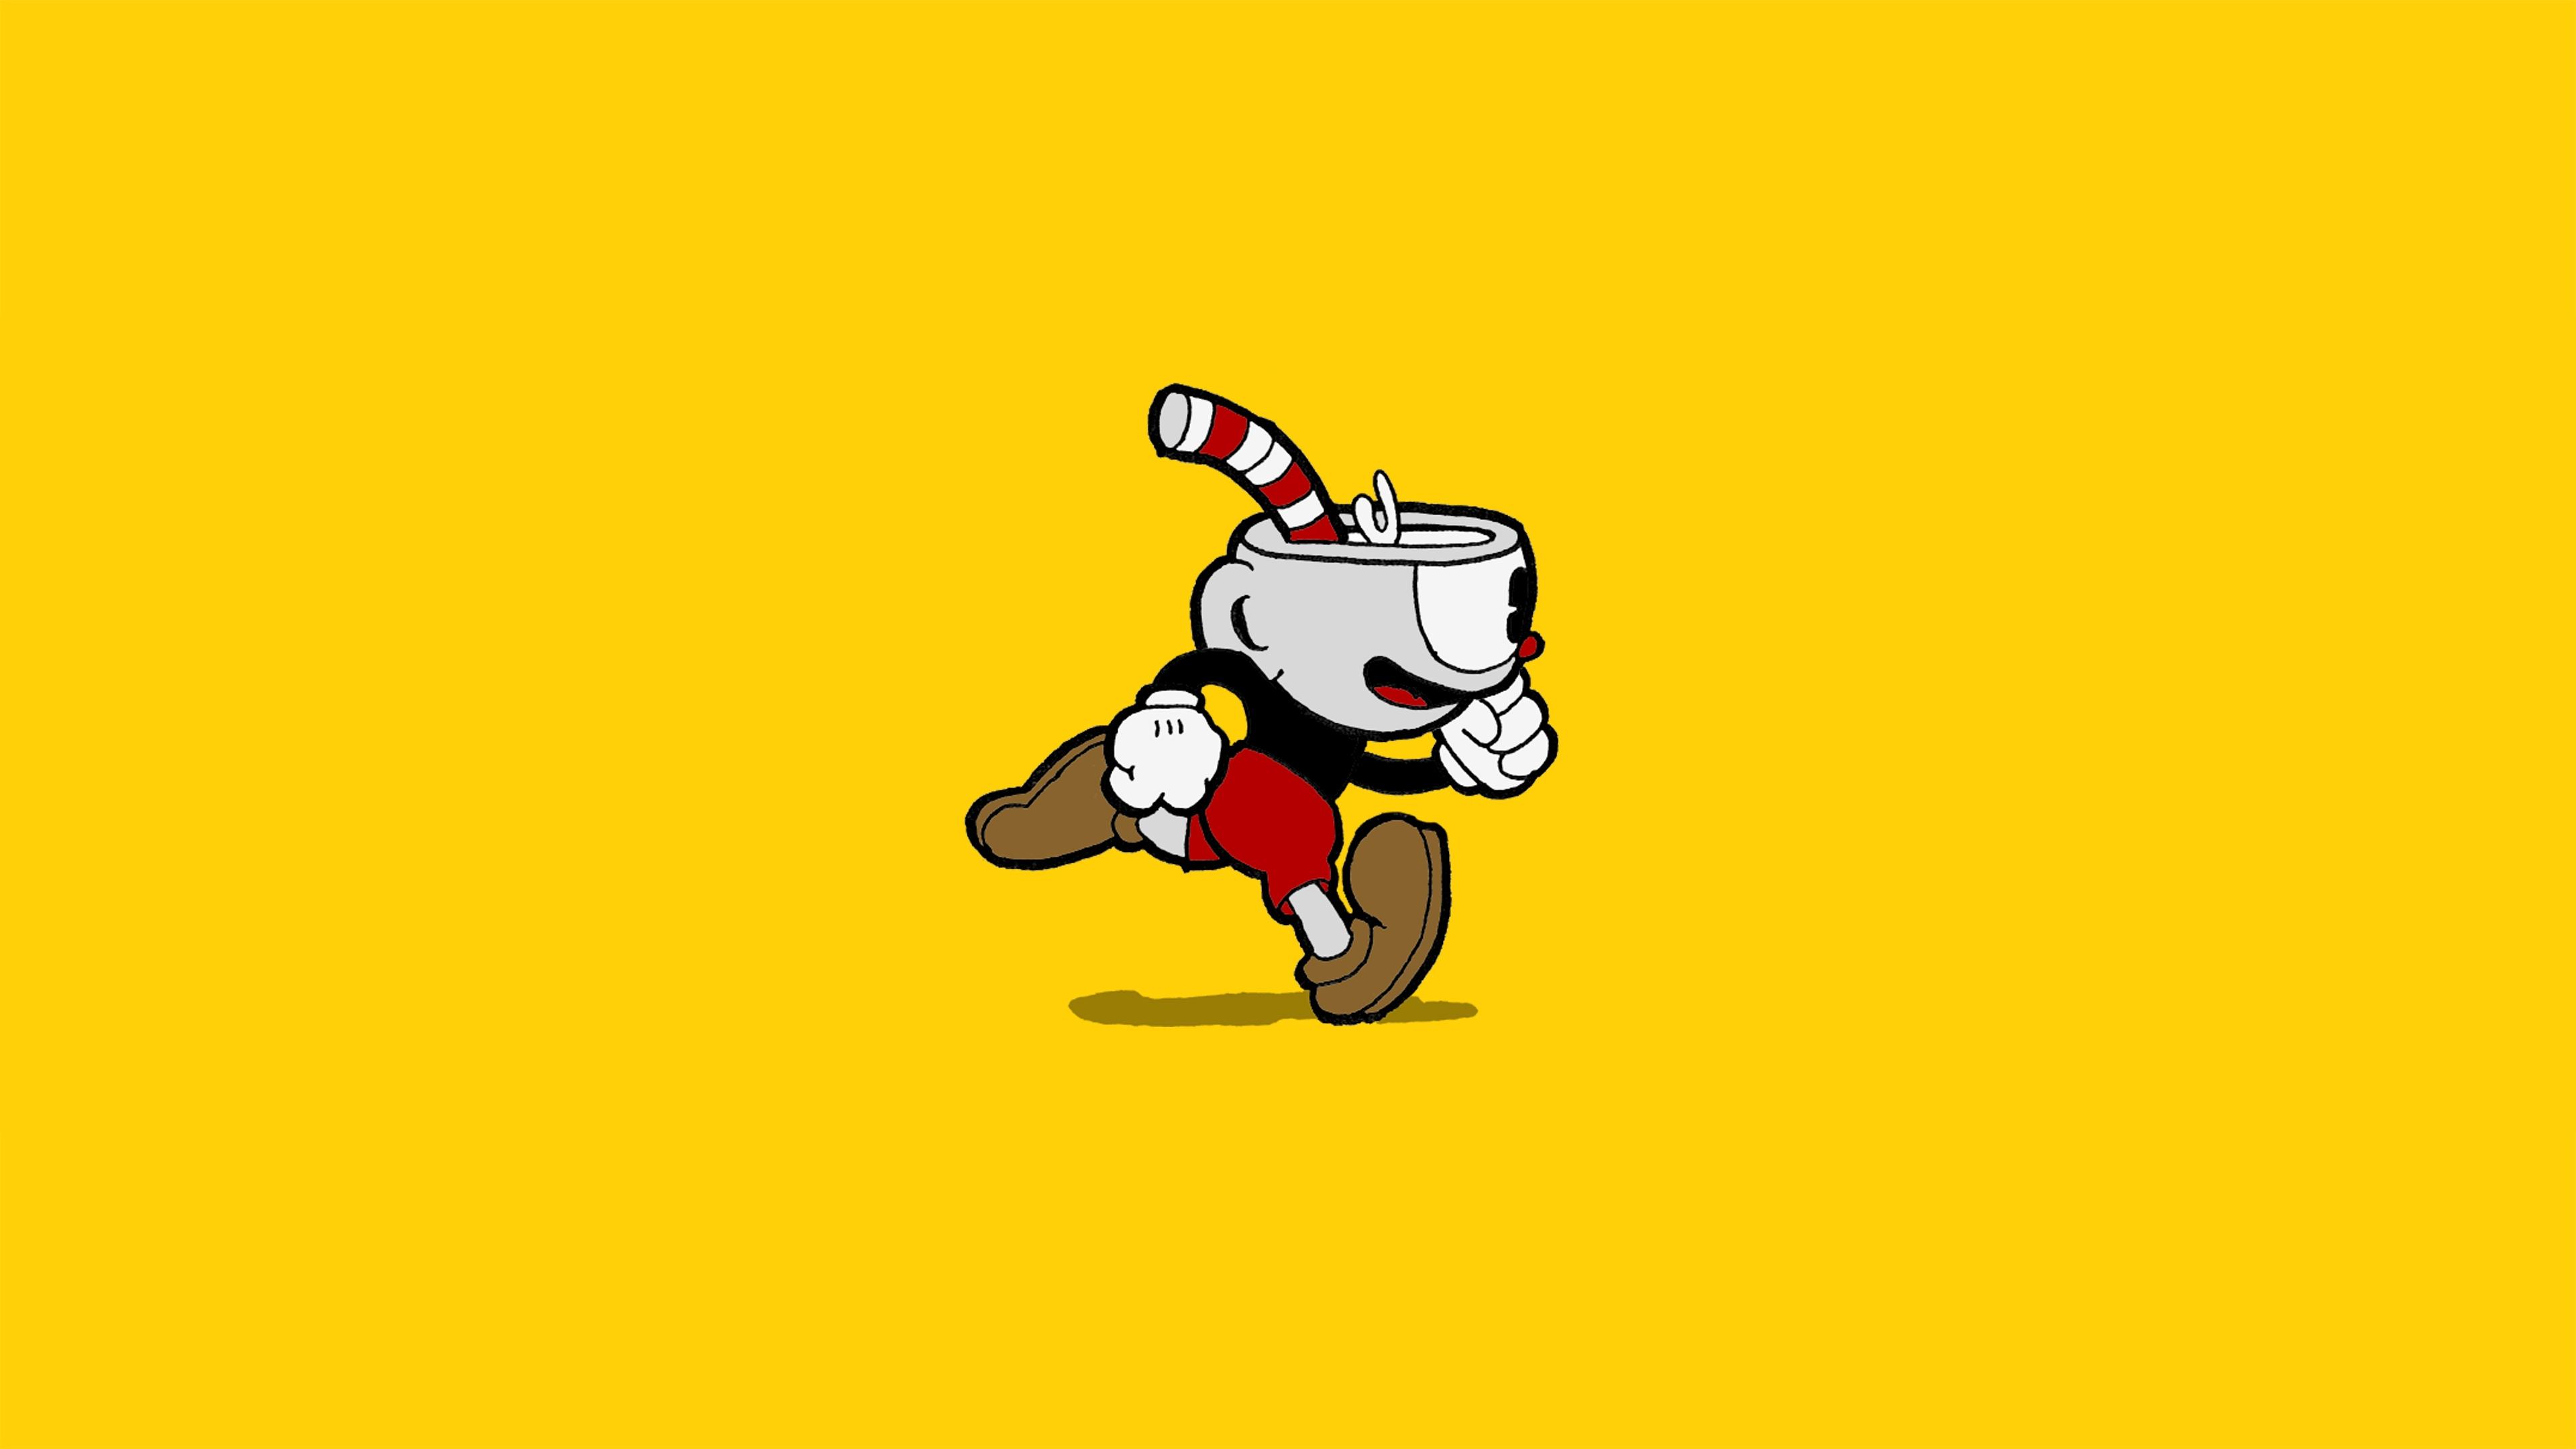 Cuphead Wallpapers Top Free Cuphead Backgrounds Wallpaperaccess Images, Photos, Reviews